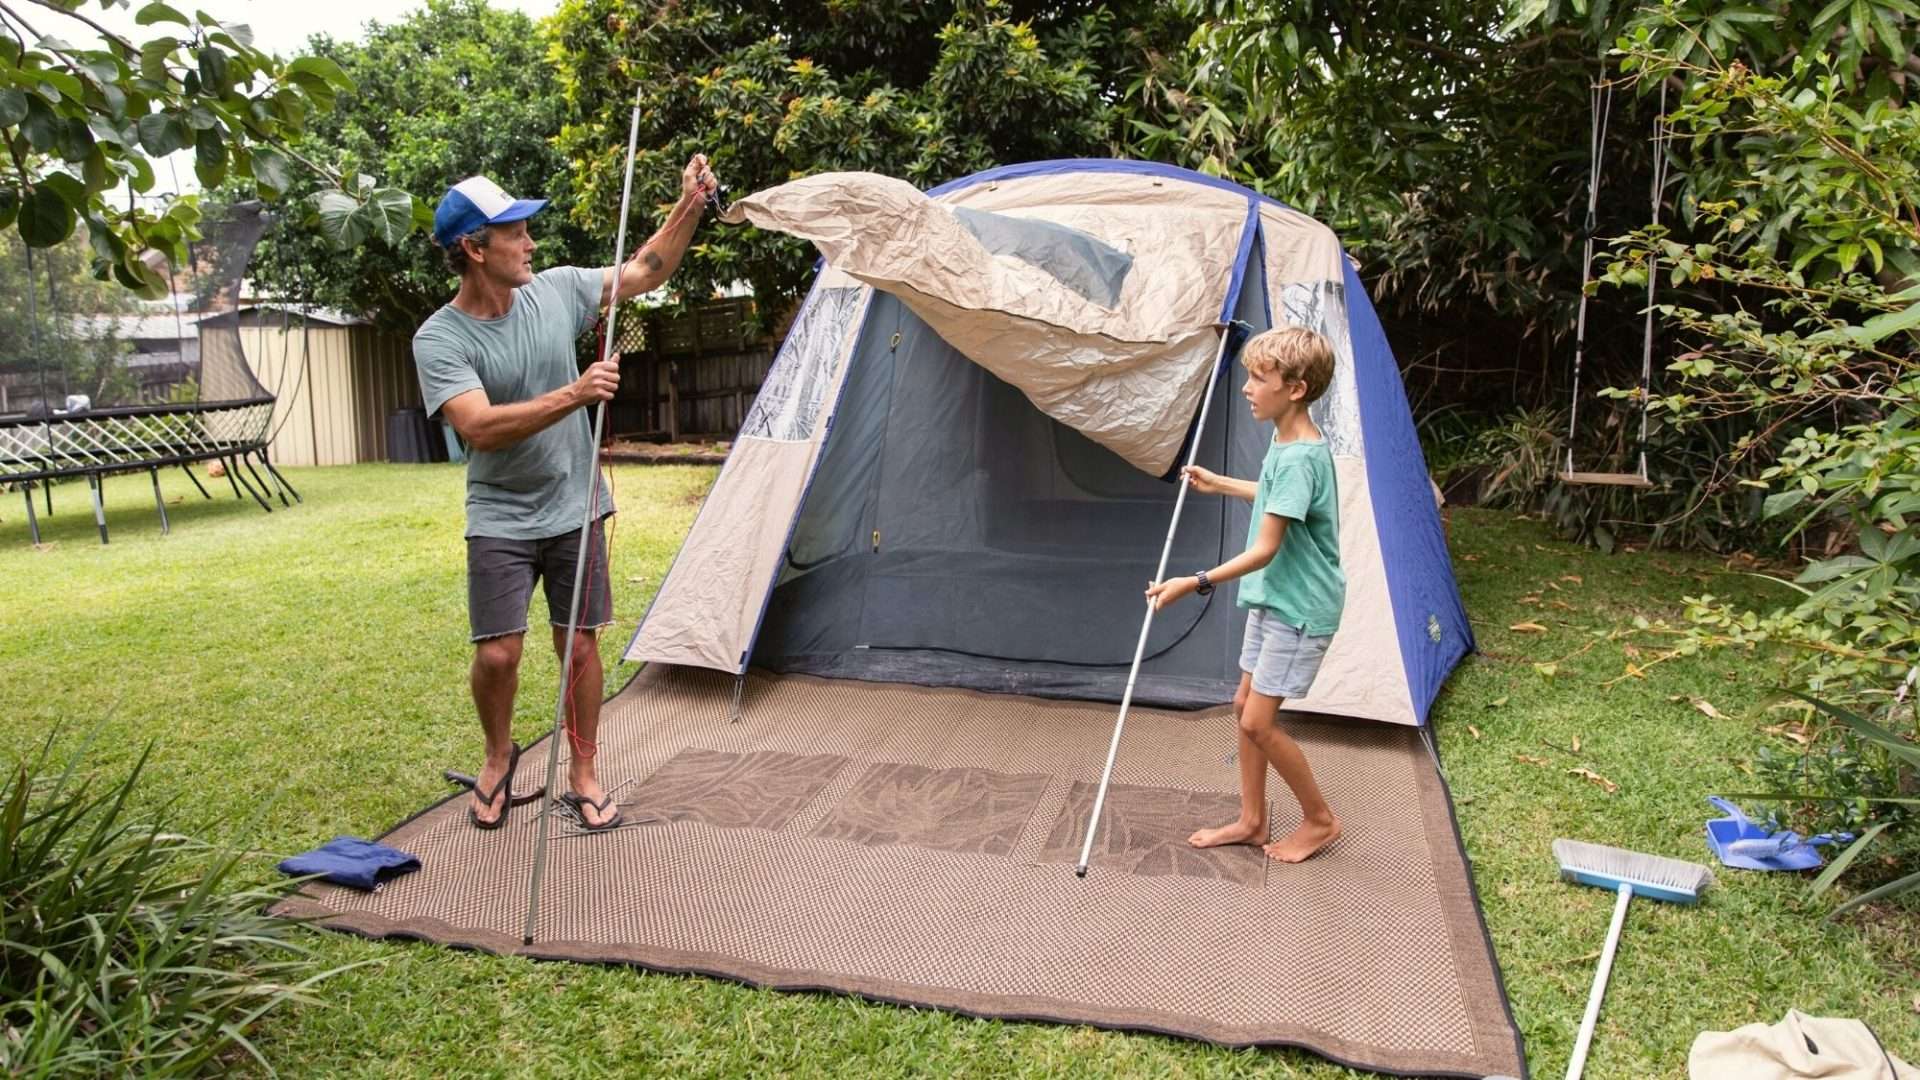 father and son setting up a tent